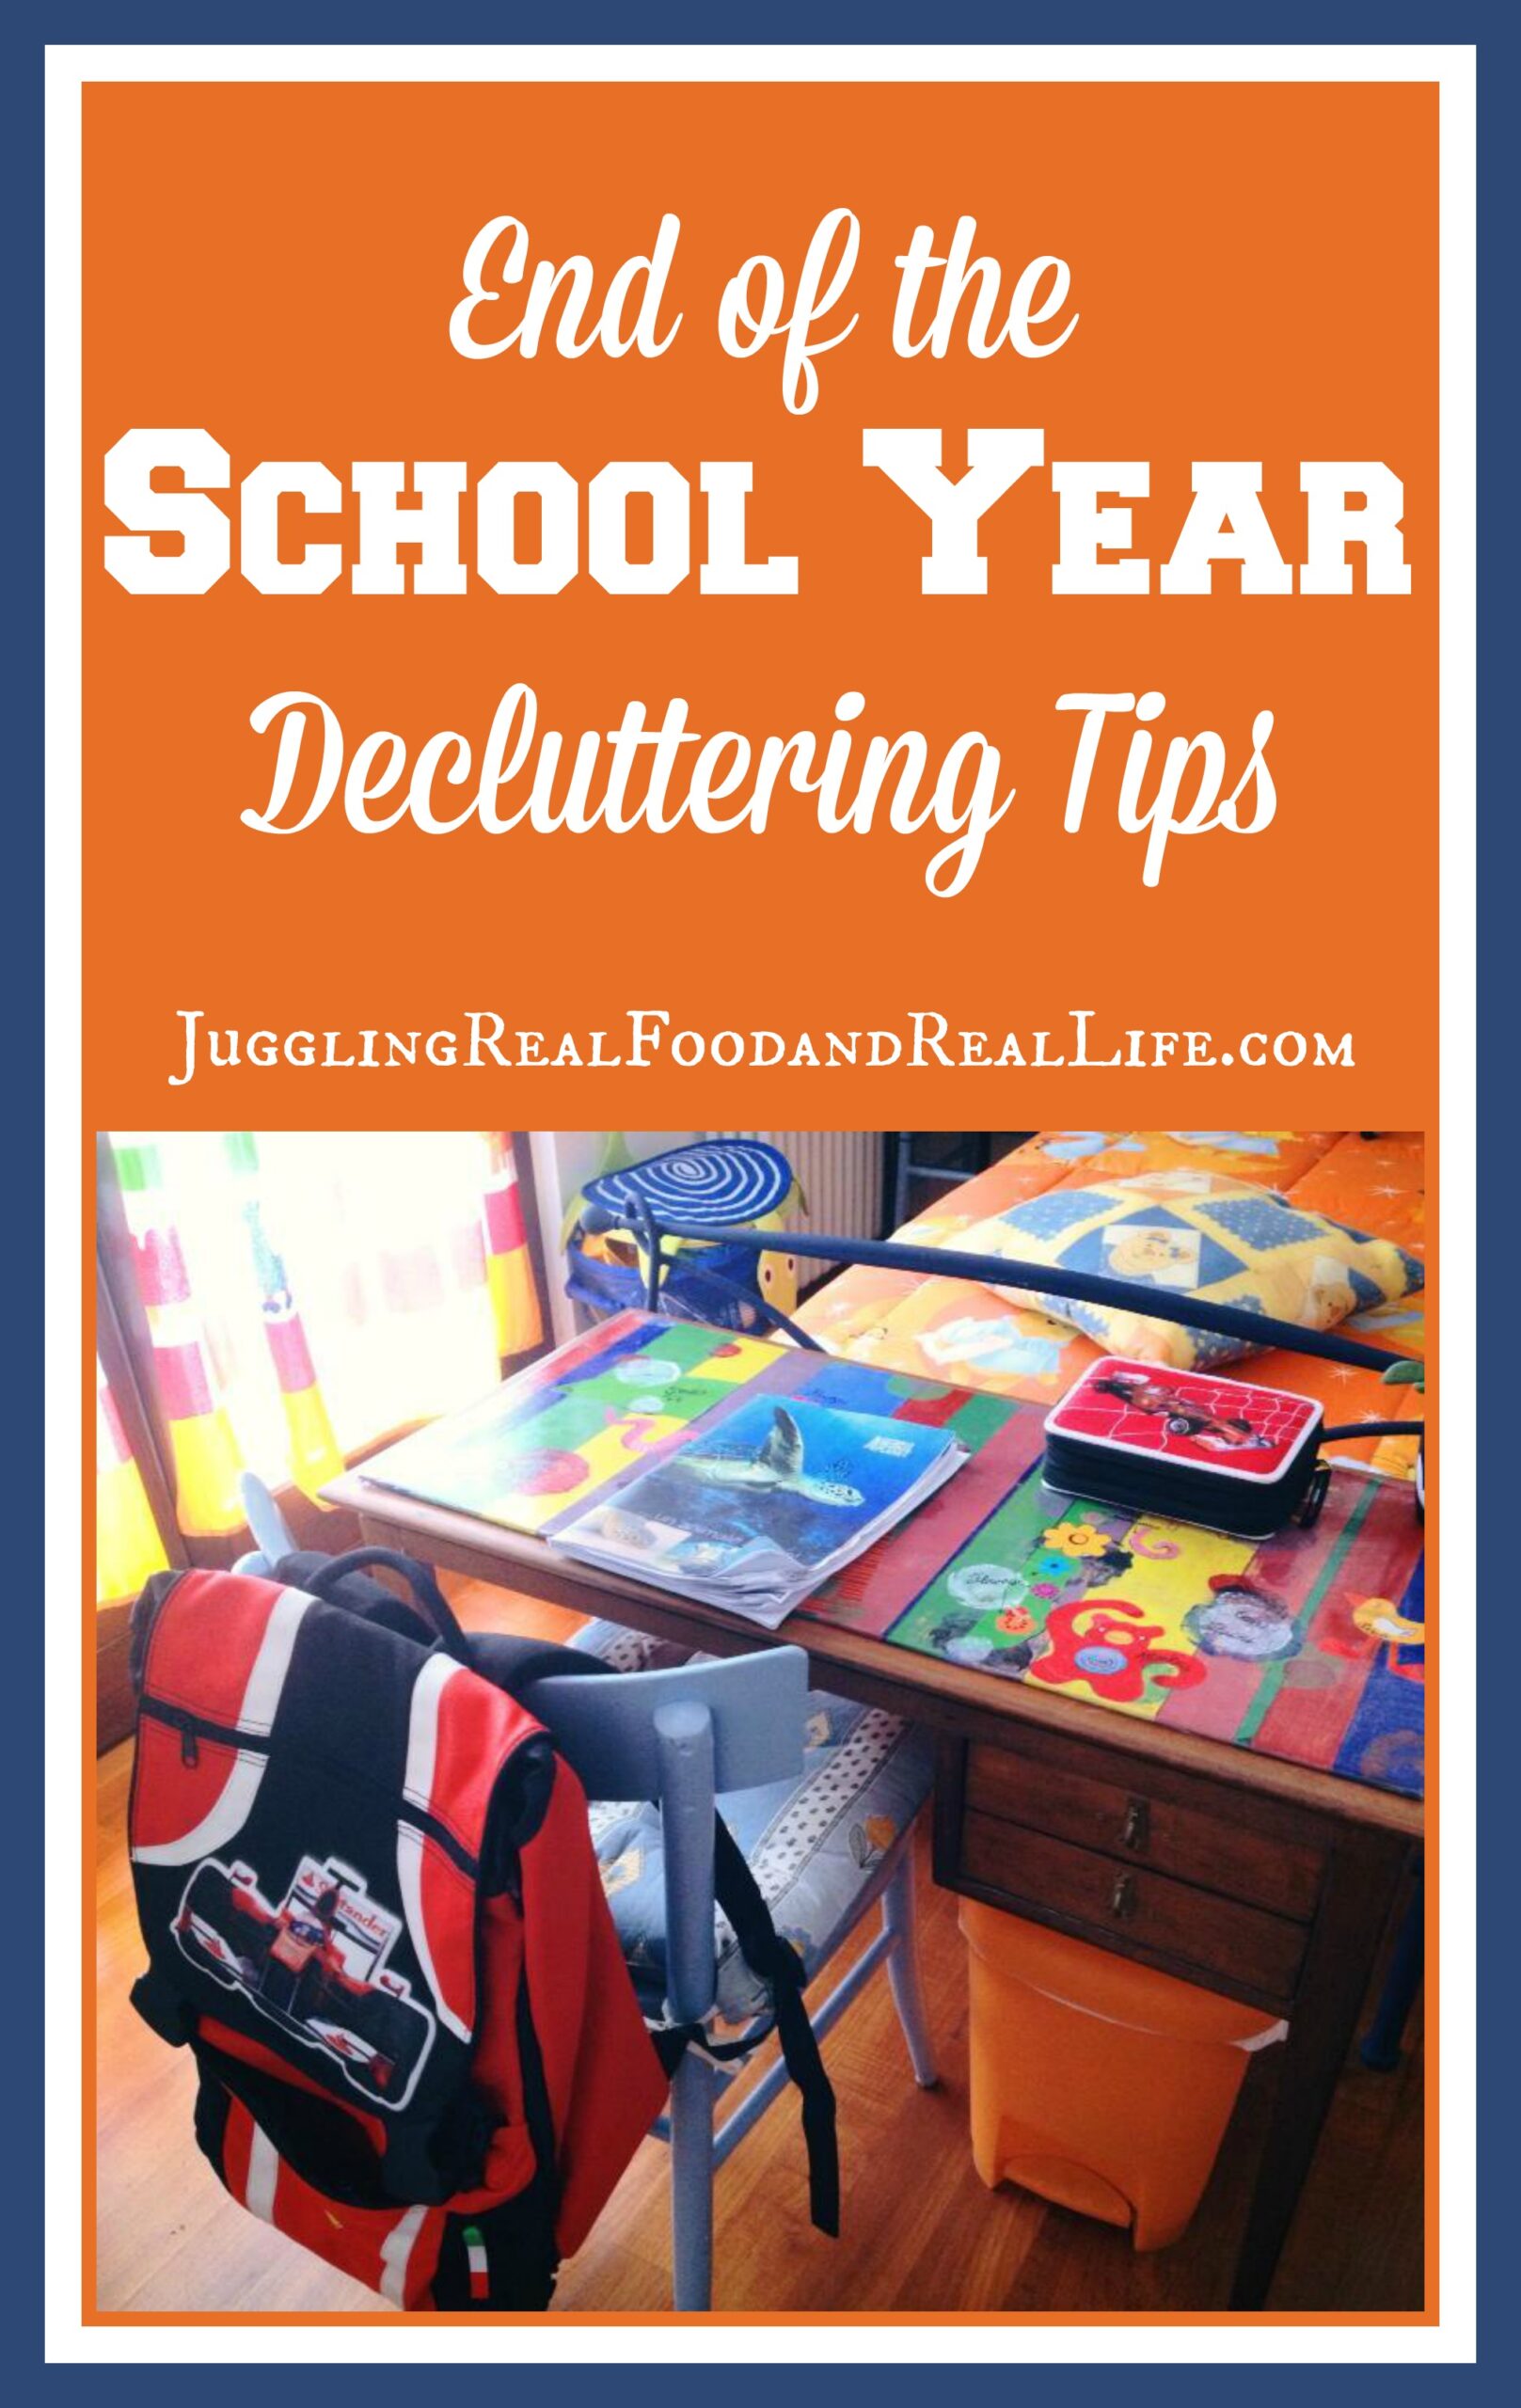 End of the School Year Decluttering Tips